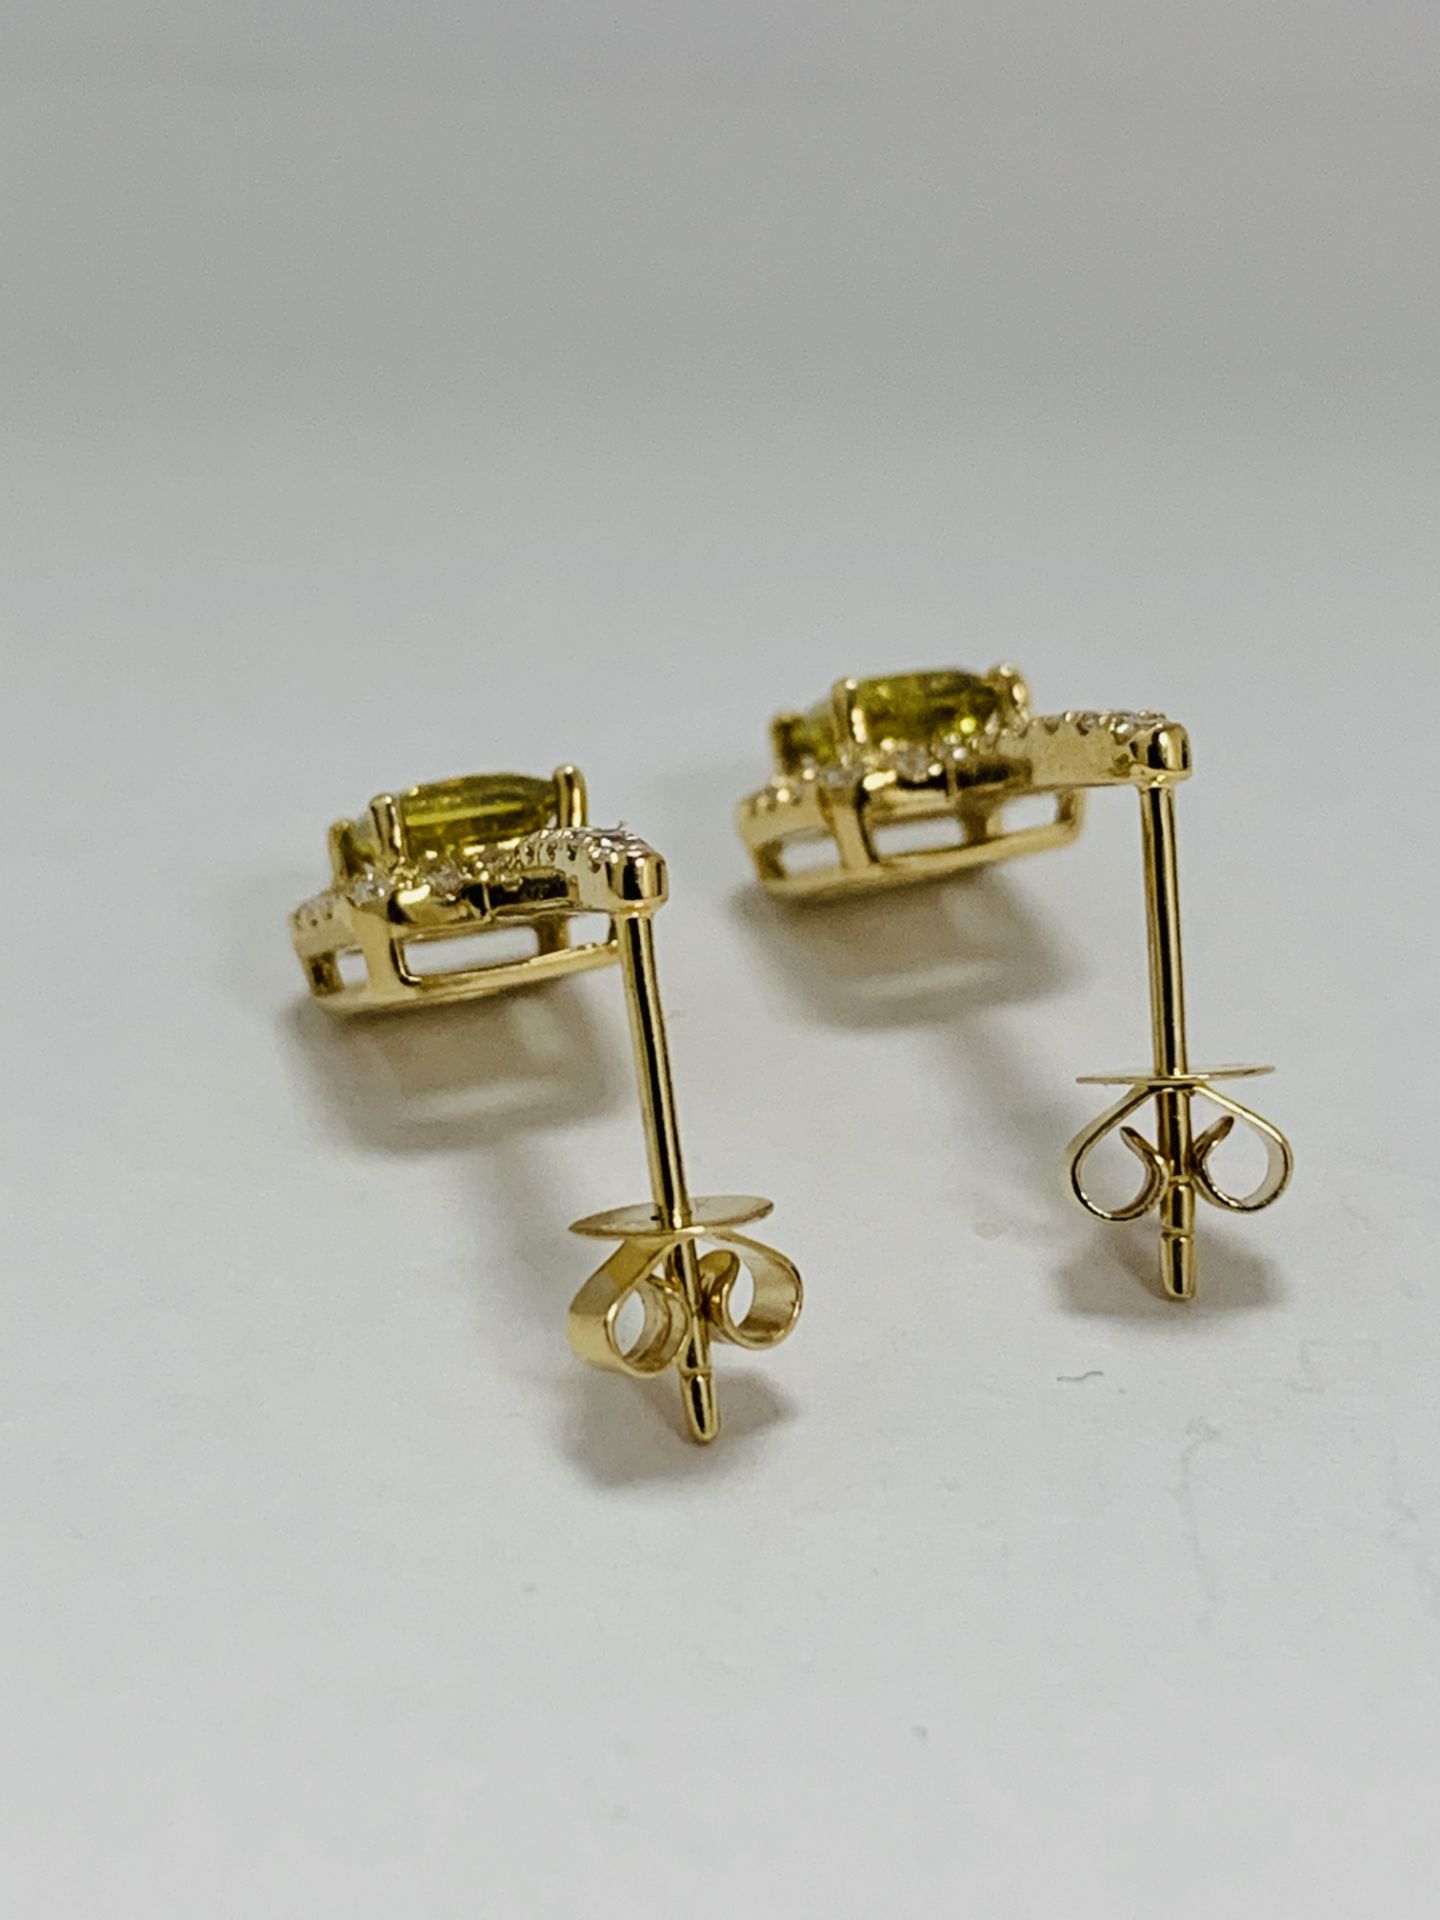 14K Yellow Gold Pair Of Earrings - Image 5 of 11